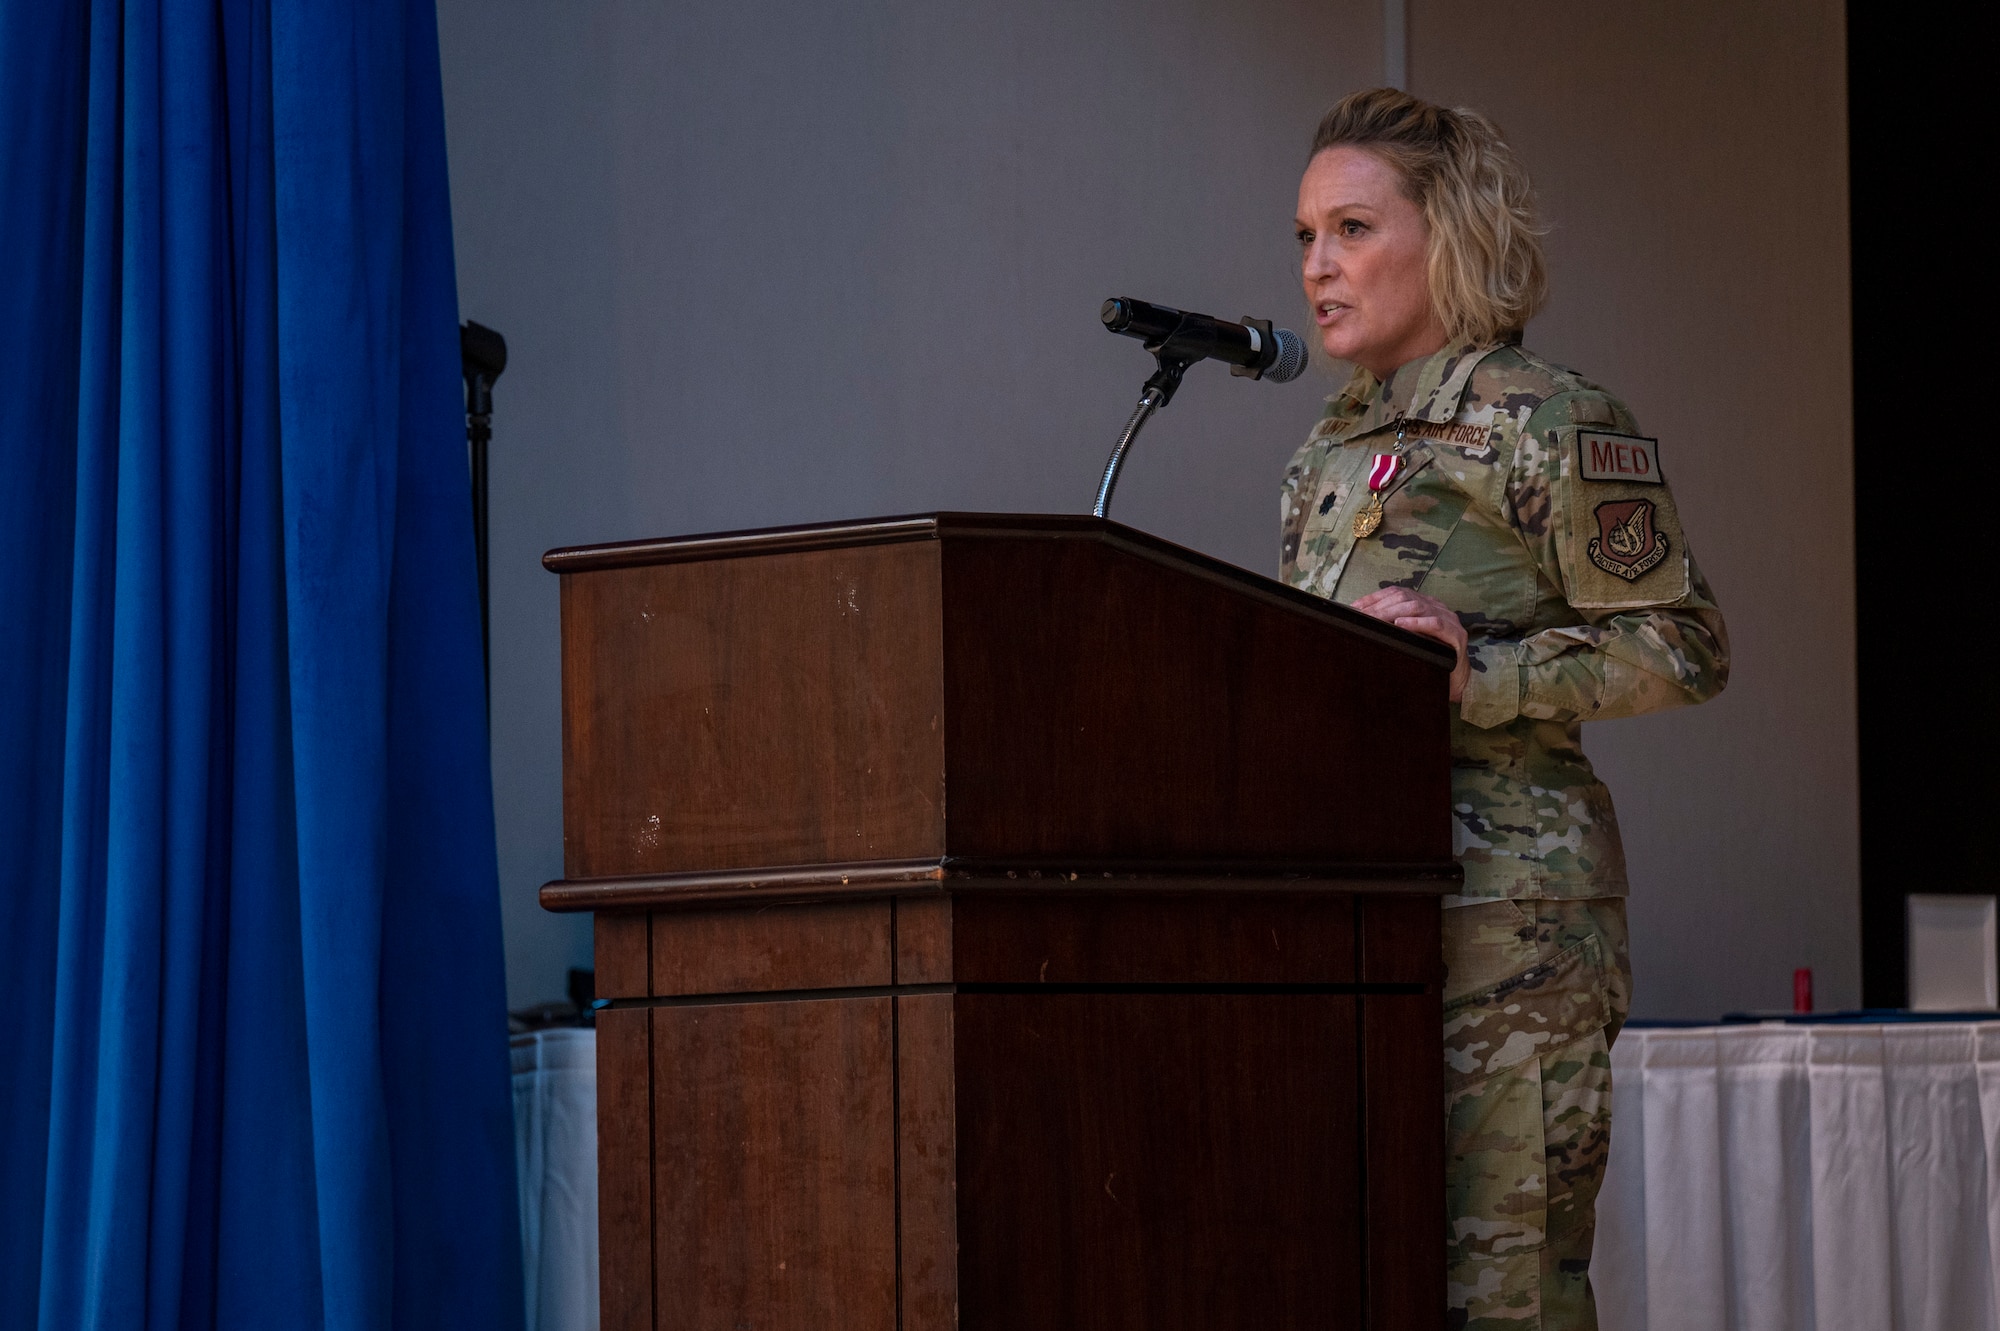 U.S. Air Force Lt. Col. Shannon Hunt, 51st Operational Medical Readiness Squadron outgoing commander, provides a speech during the 51st OMRS change of command at Osan Air Base, Republic of Korea, June 8, 2023. During the ceremony, Lt. Col. Jamie Cornett took command of the 51st OMRS. (U.S. Air Force photo by Airman 1st Class Aaron Edwards)